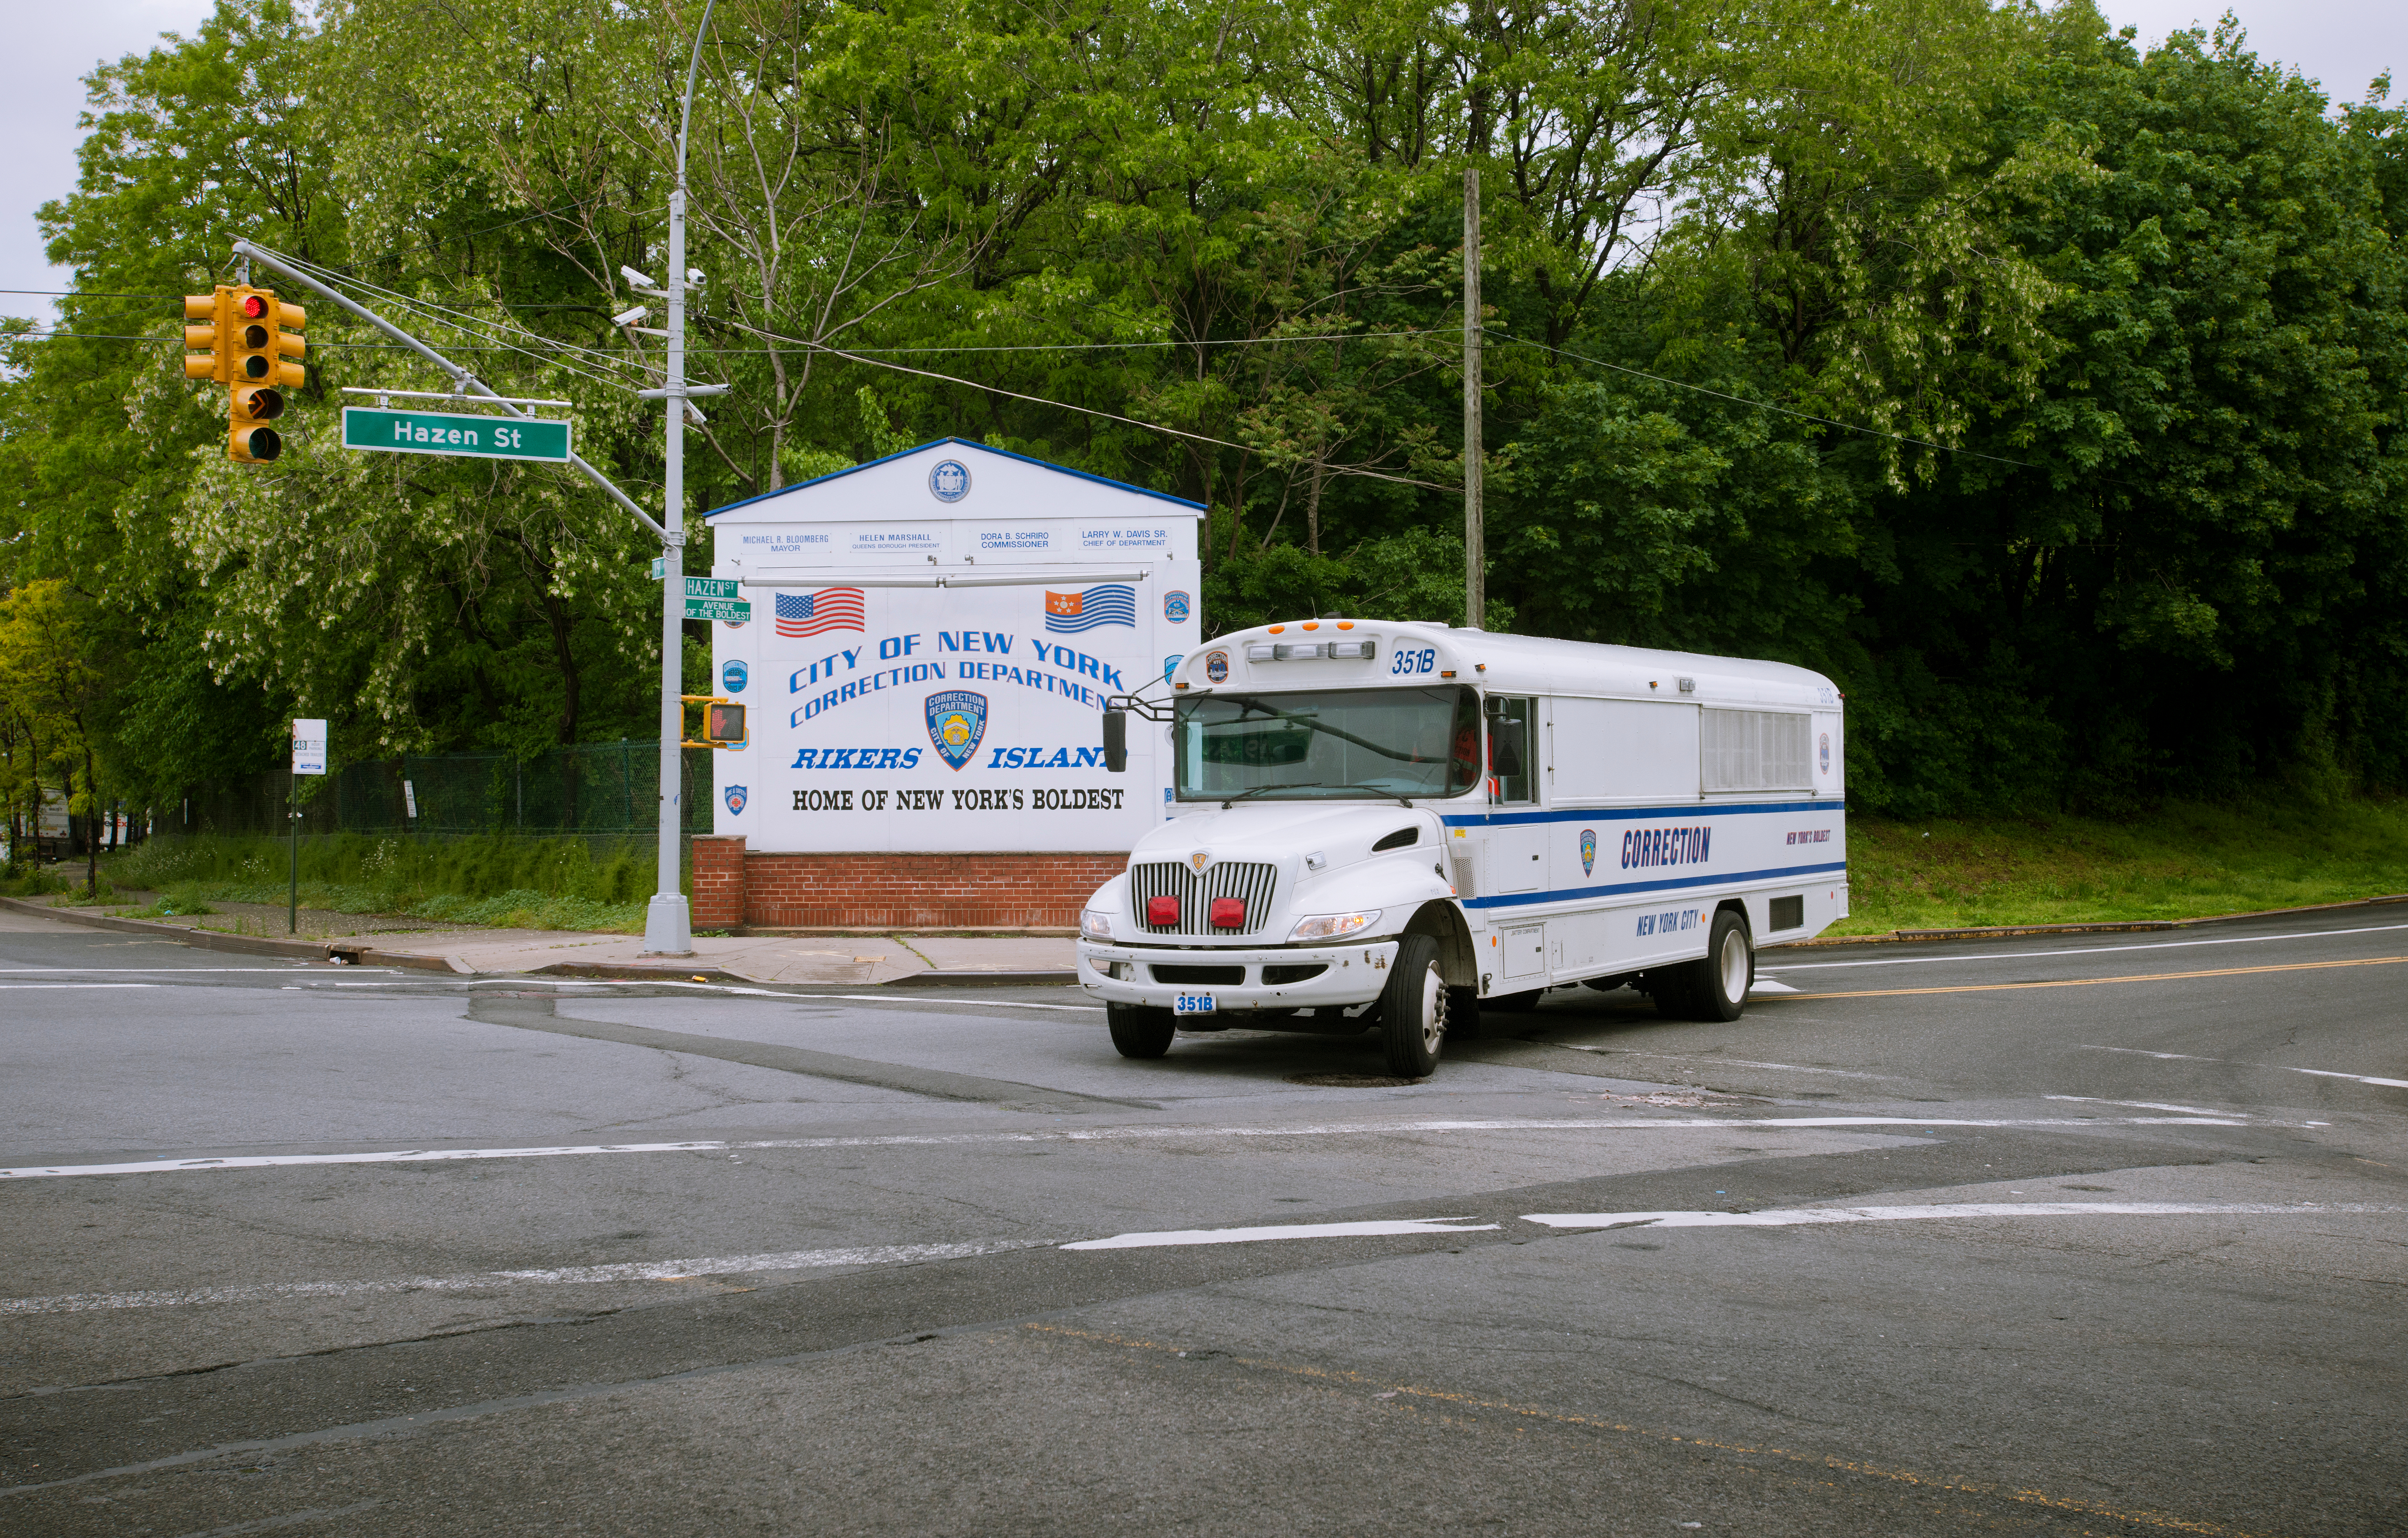 The entrance to the Rikers Island Correctional Facility in Queens.